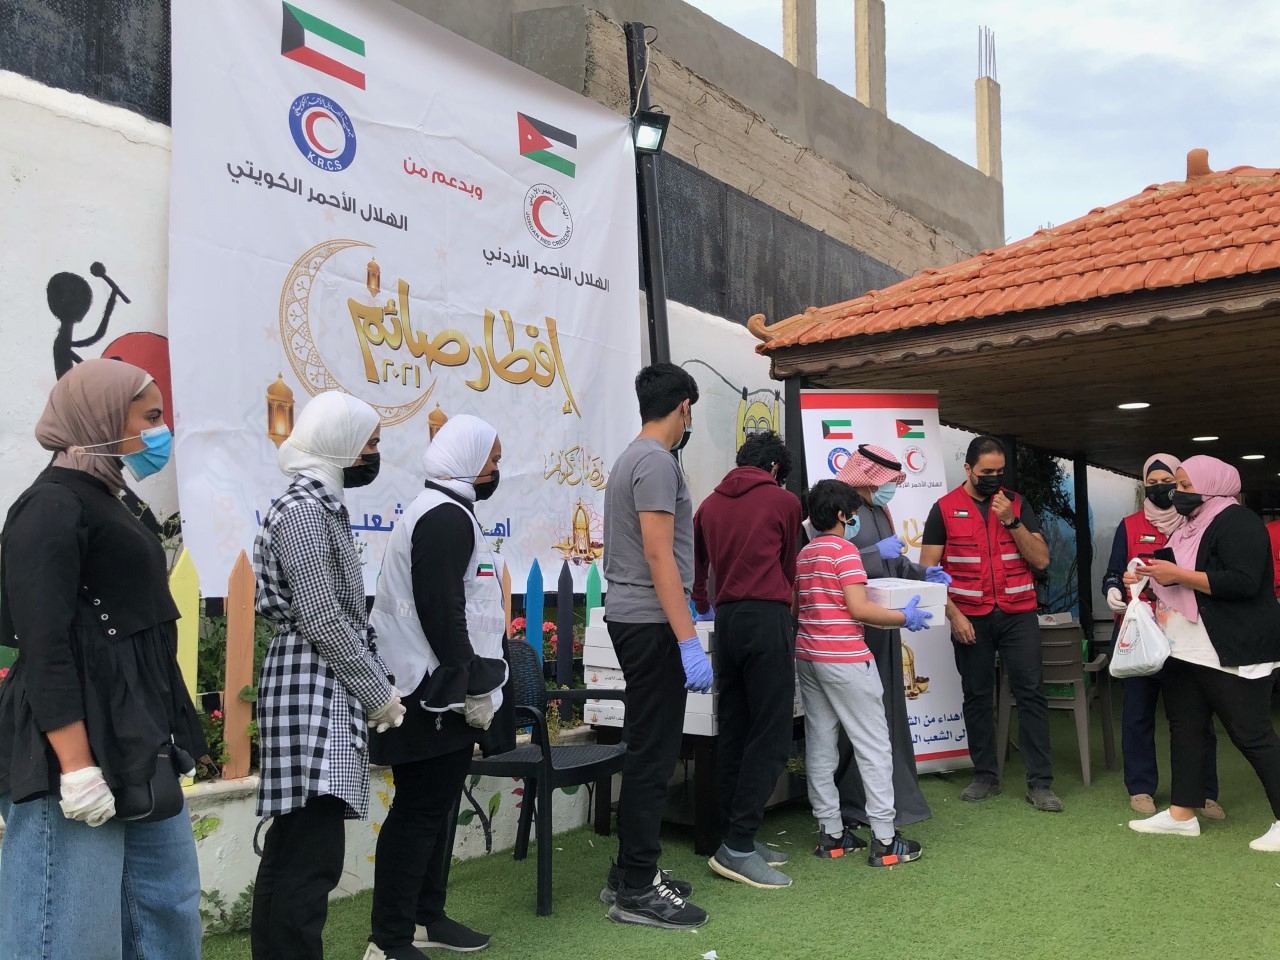 KRCS launches the (Iftar) fasting project